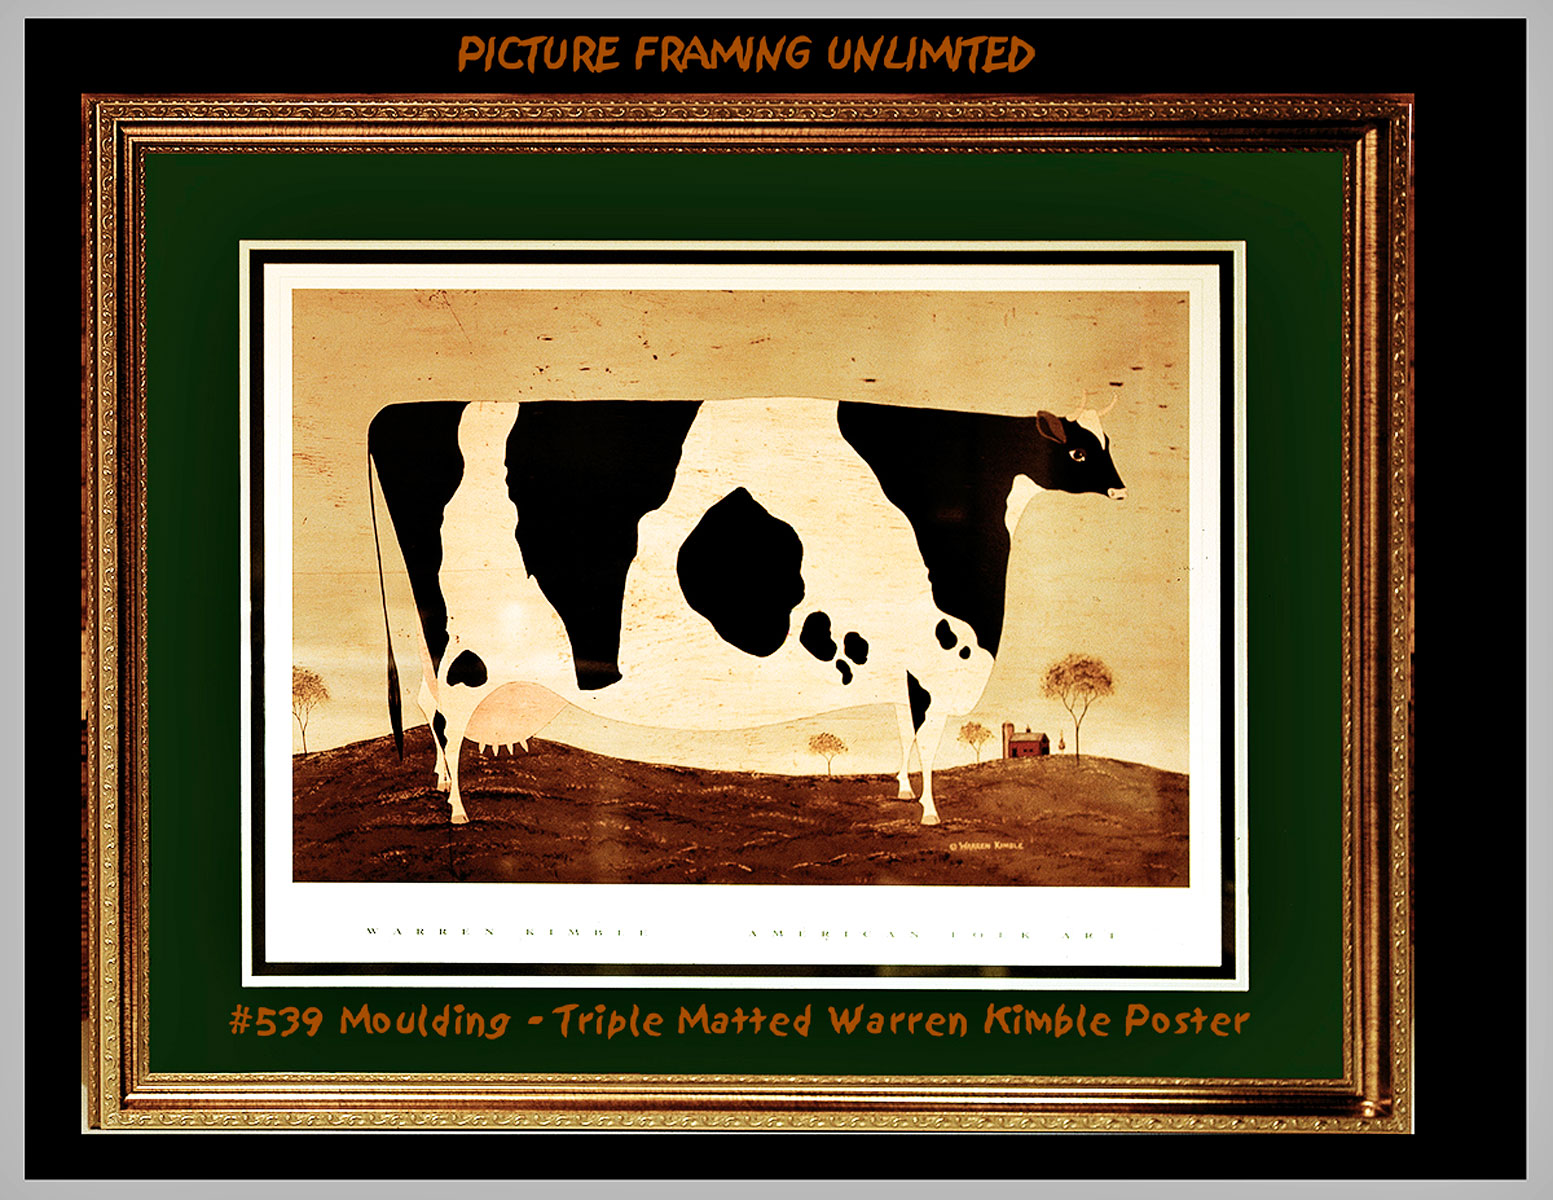 Custom Picture Frames For Sale in Dutchess County, NY